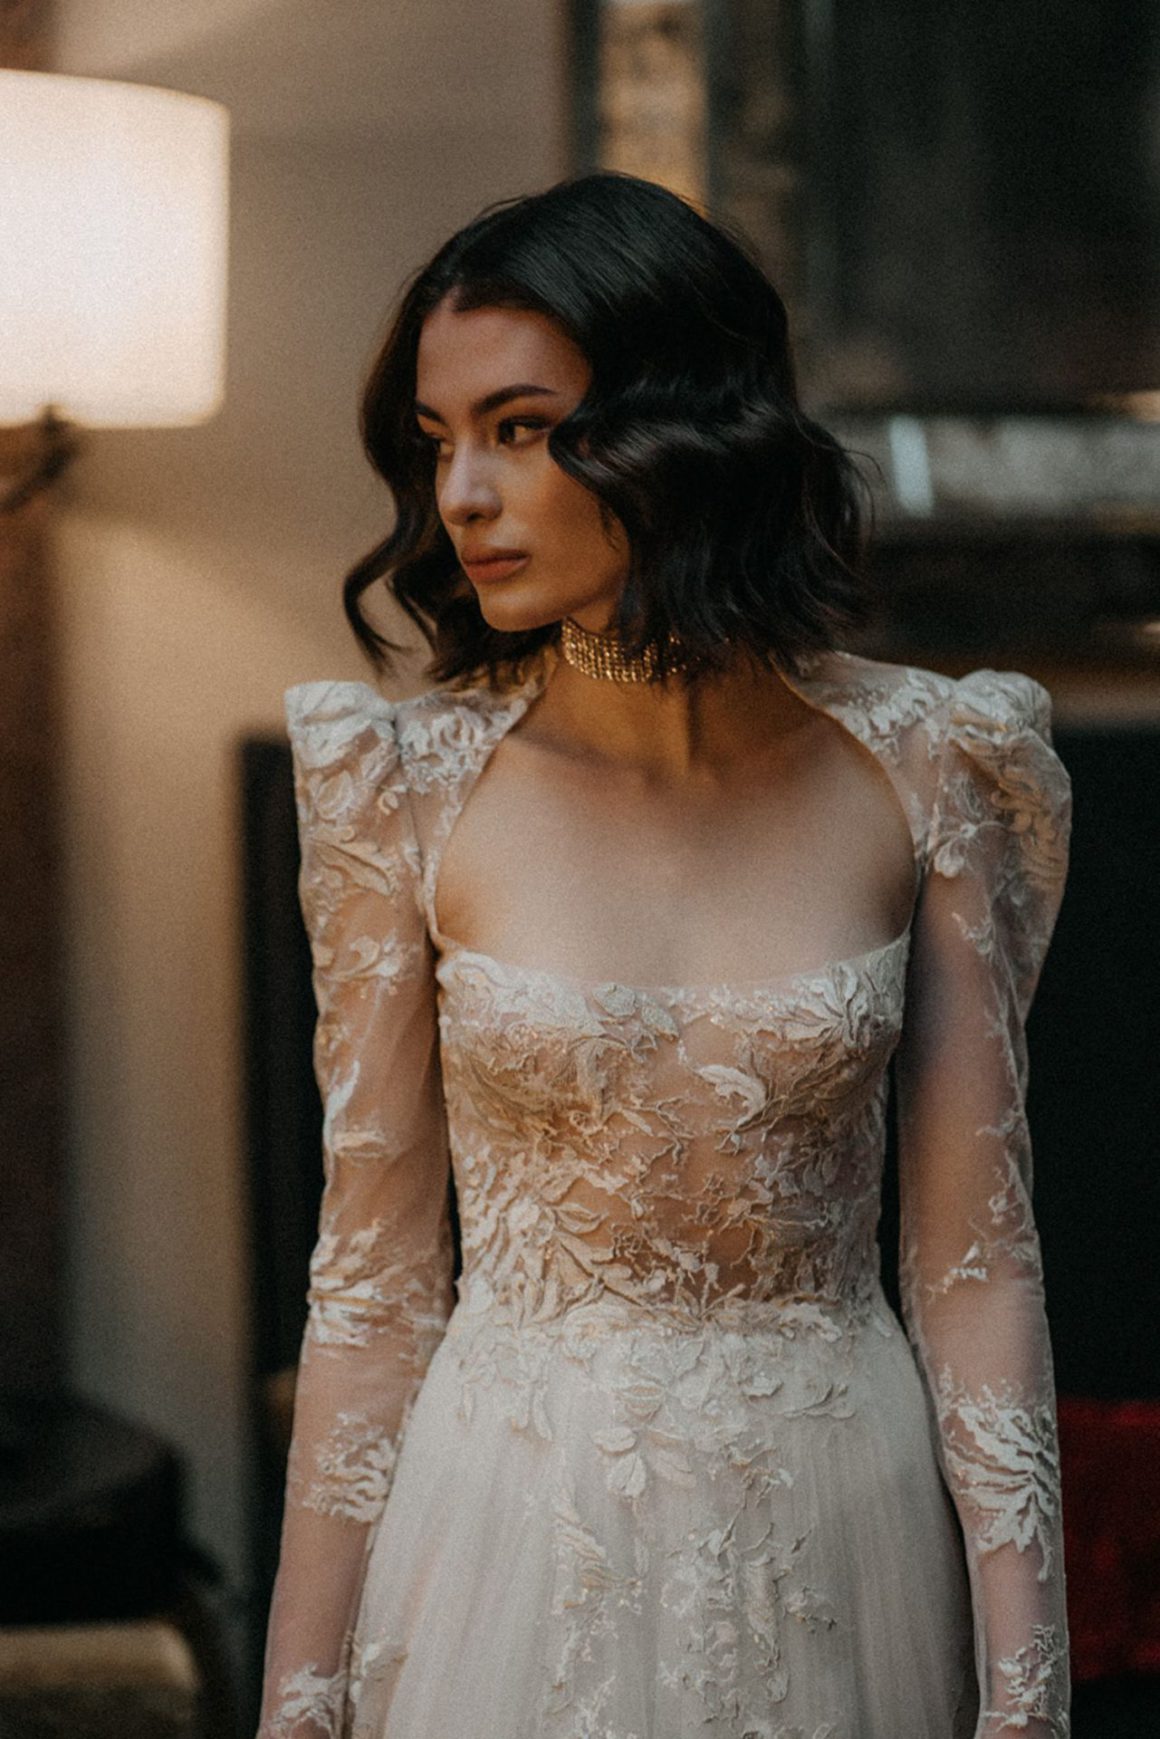 HOW TO CREATE A VINTAGE WEDDING DRESS LOOK | Dream Dresses by P.M.N.